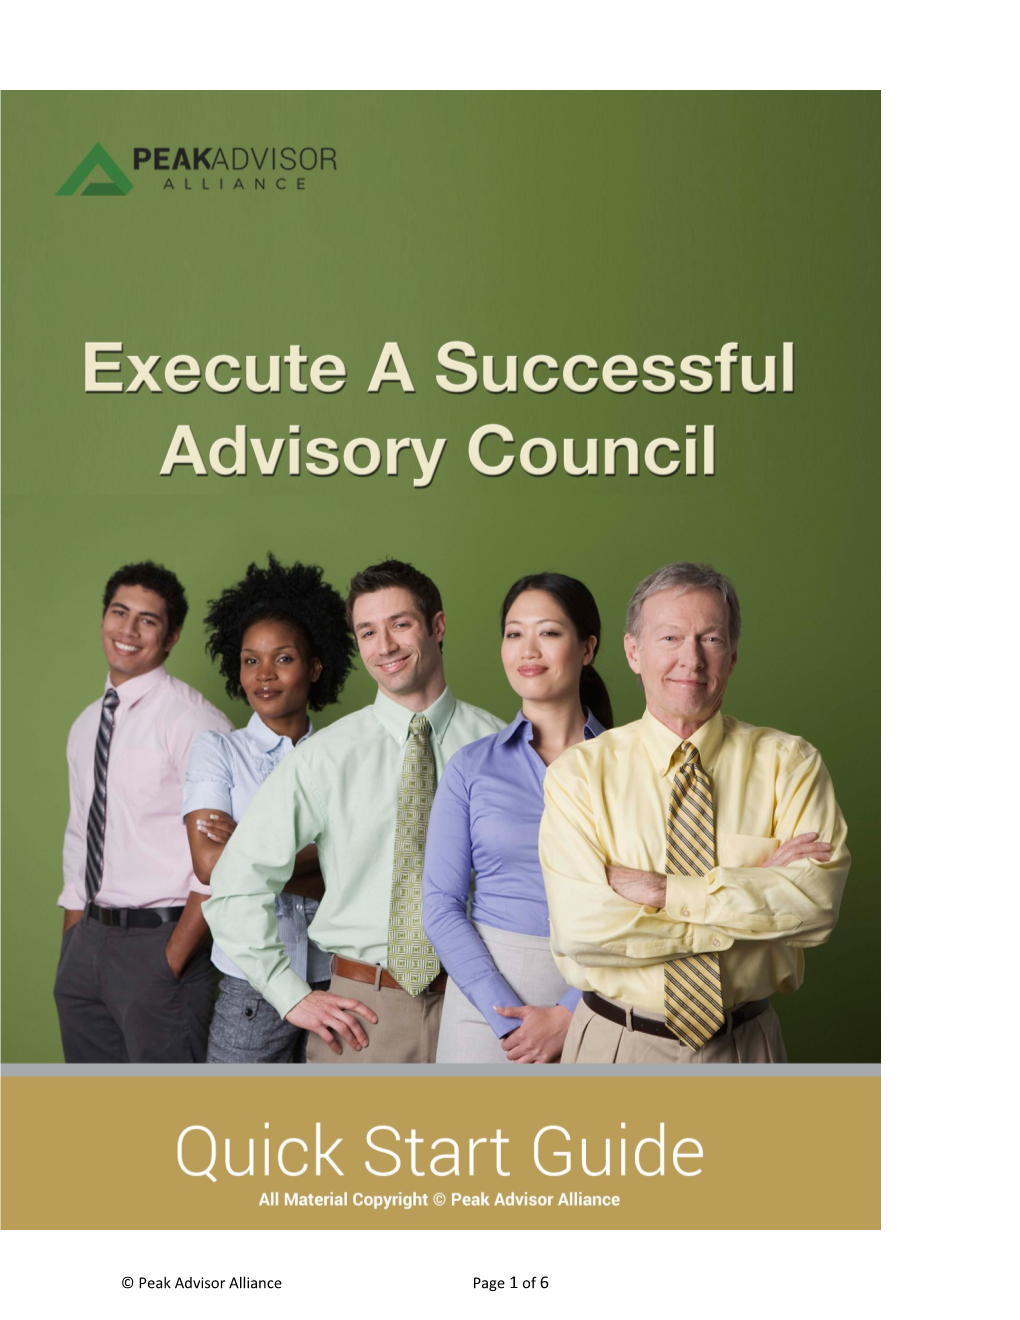 Excecute a Successful Advisory Councilquick Start Guide